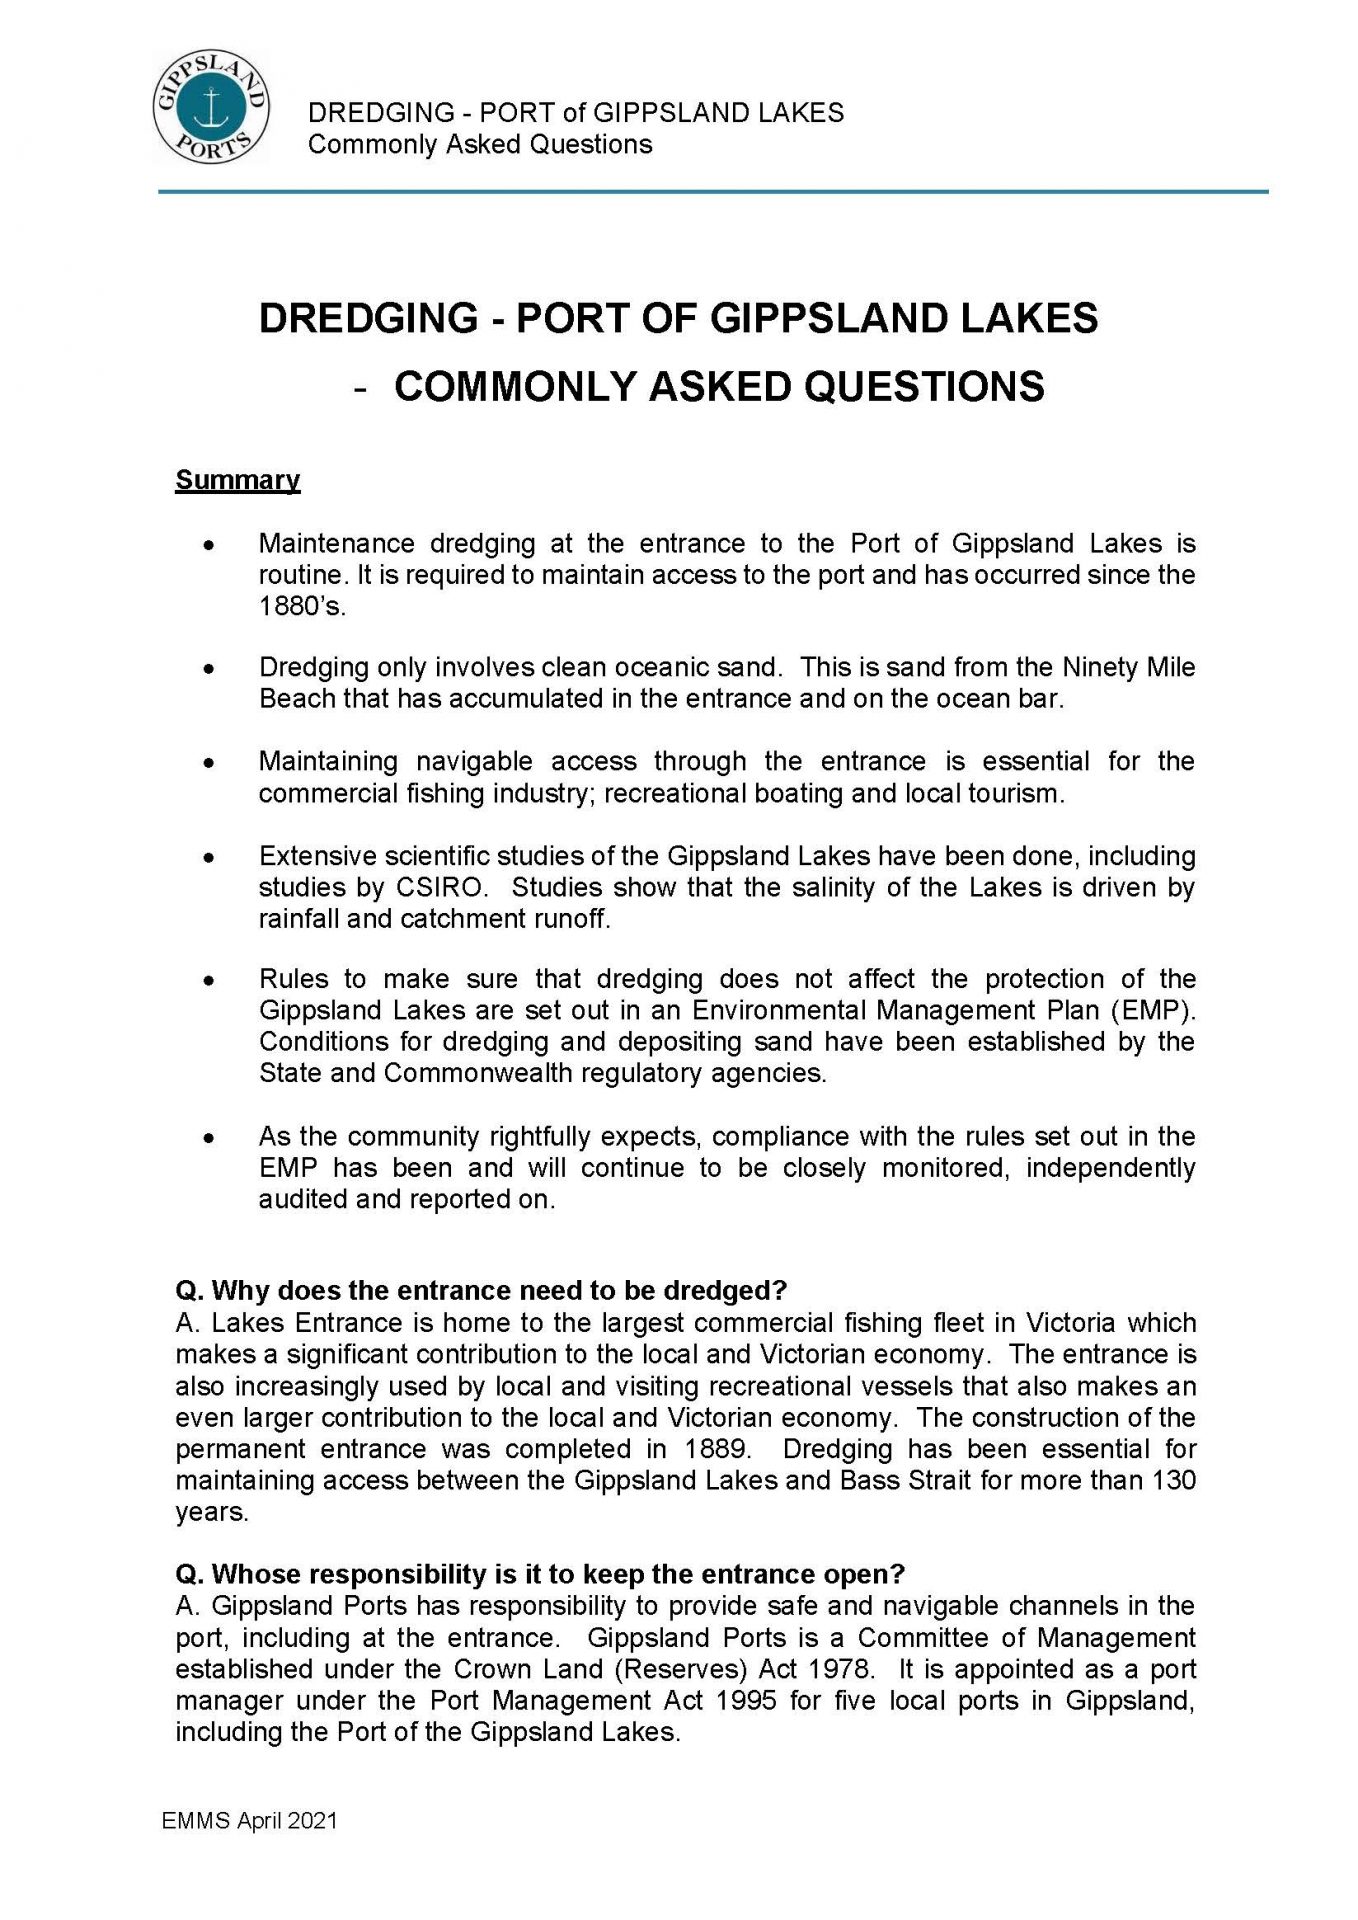 dredging-commonly-asked-questions_apr2021_page_1